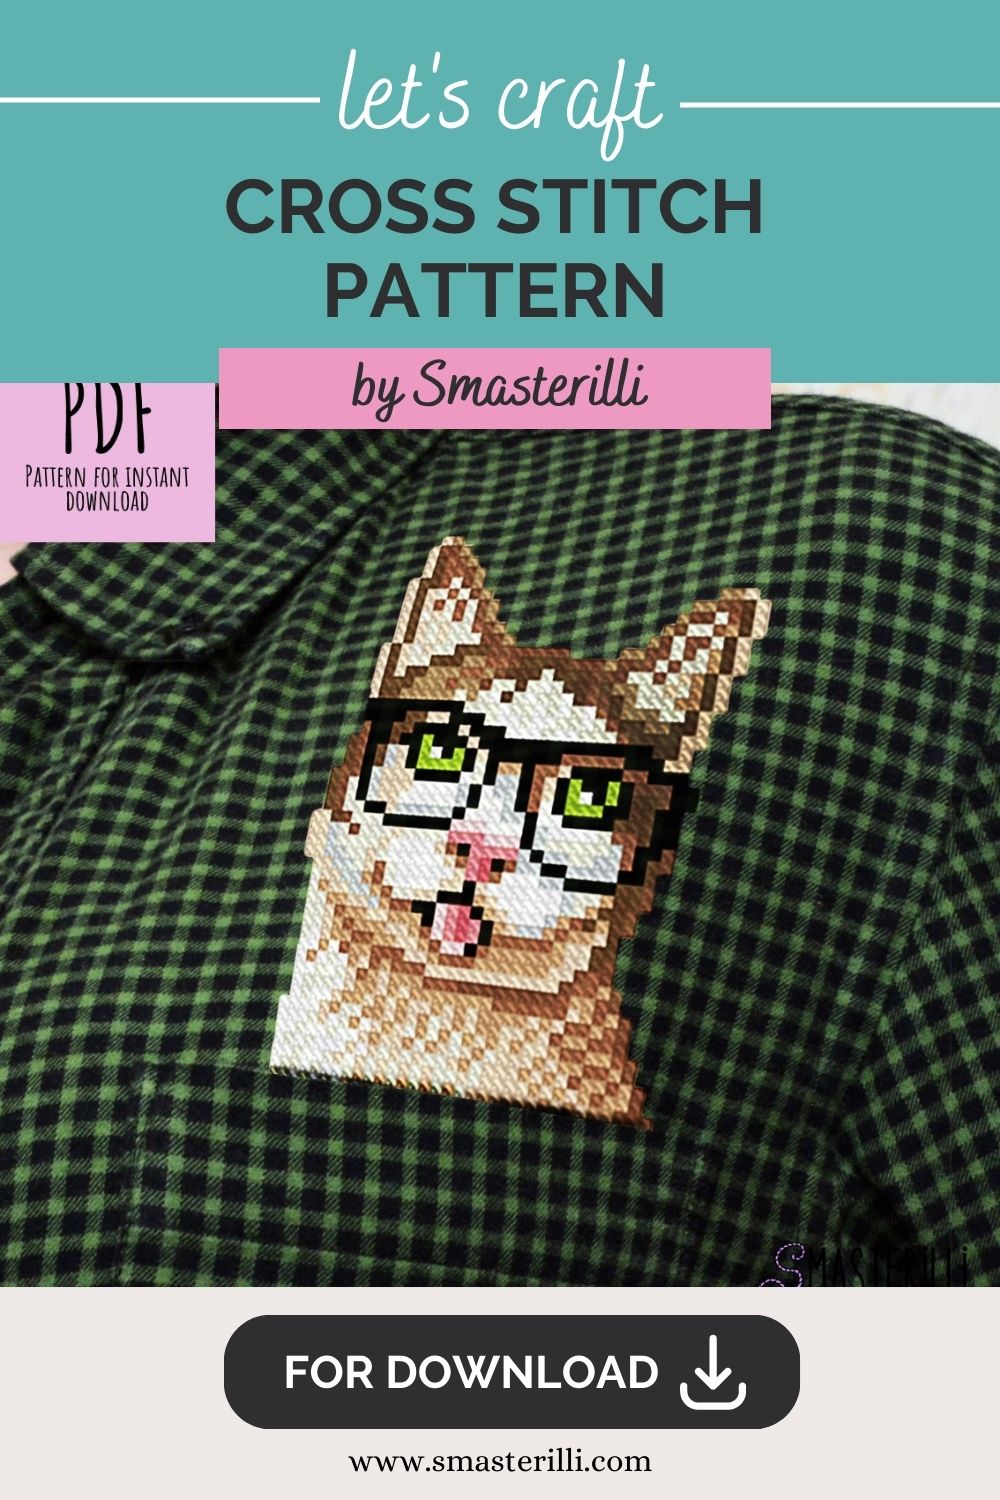 cat with glasses cross stitch pattern PDF for pocket and water soluble canvas by Smasterilli. Digital cross stitch pattern for instant download. easy cross stitch for beginners. Cat Lover's Gift idea for handmade craft #smasterilli #crossstitch #crossstitchpattern #catcrossstitch #easycrossstitch #tinycrossstitch #catwithglasses